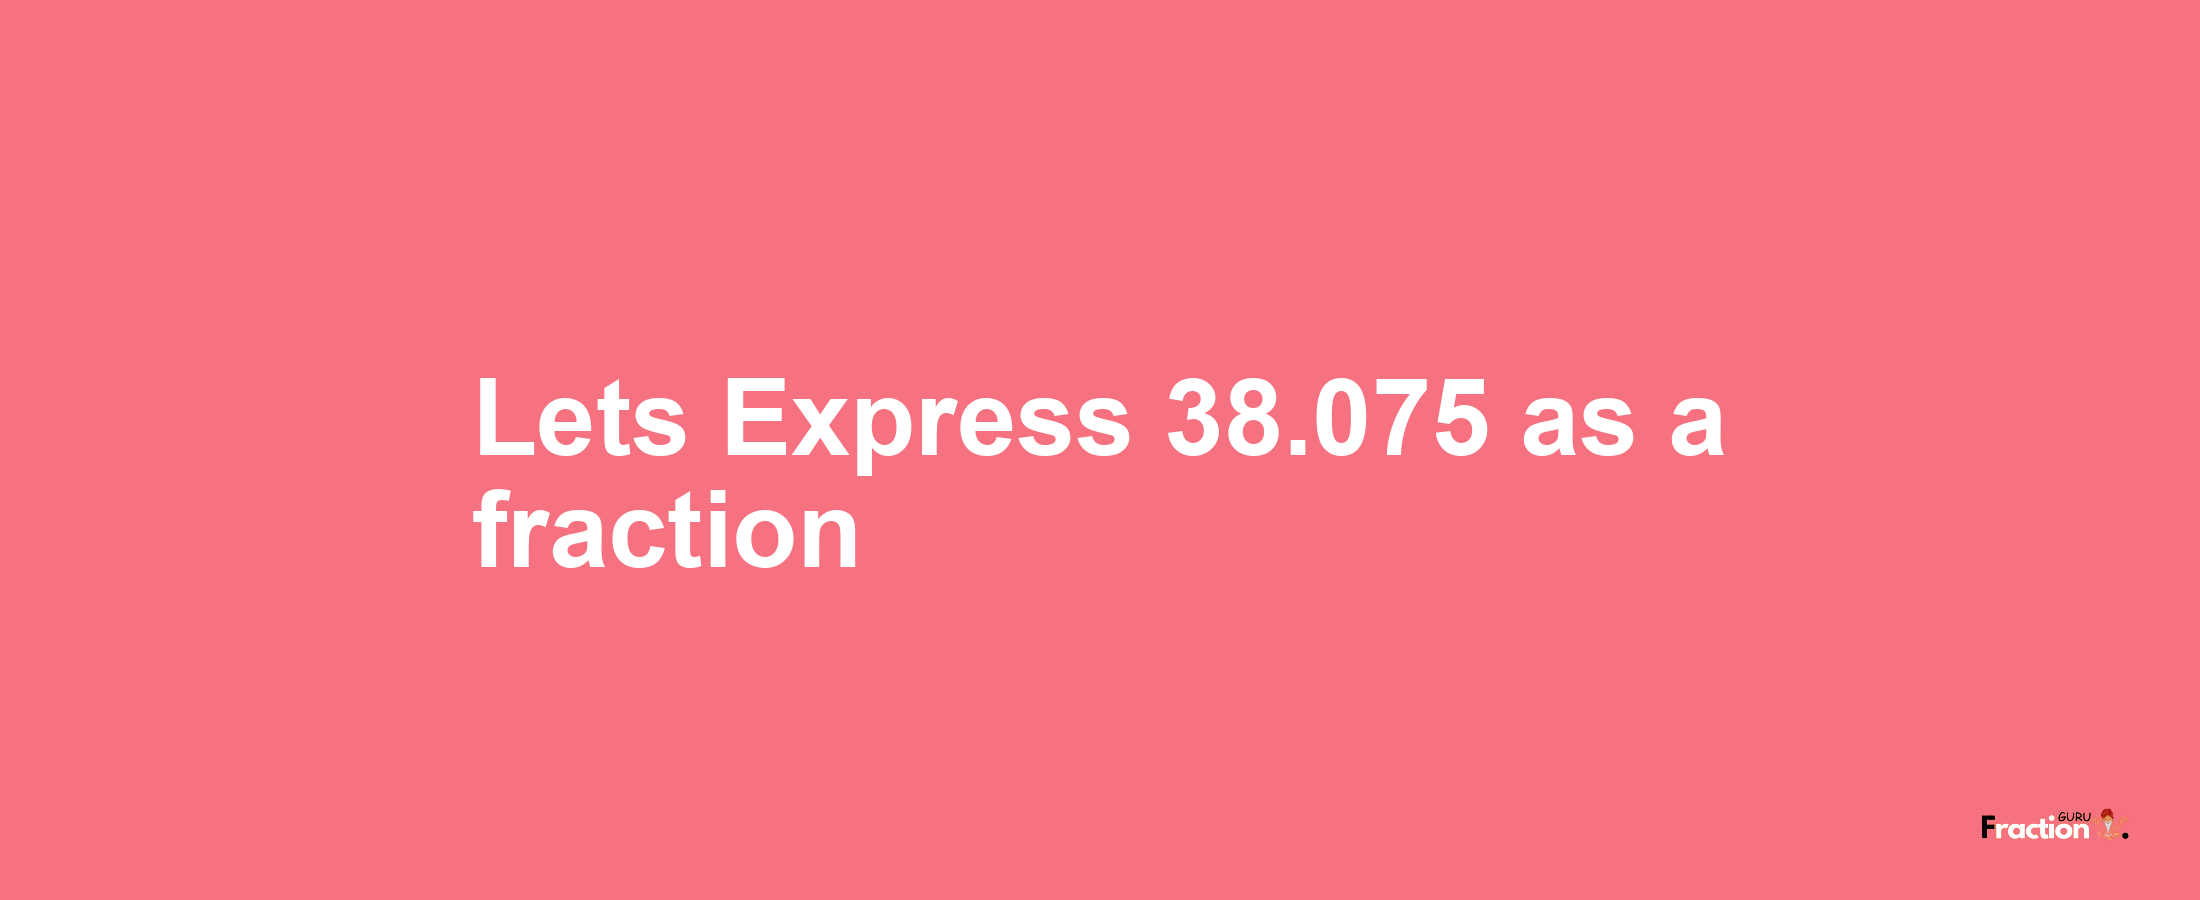 Lets Express 38.075 as afraction